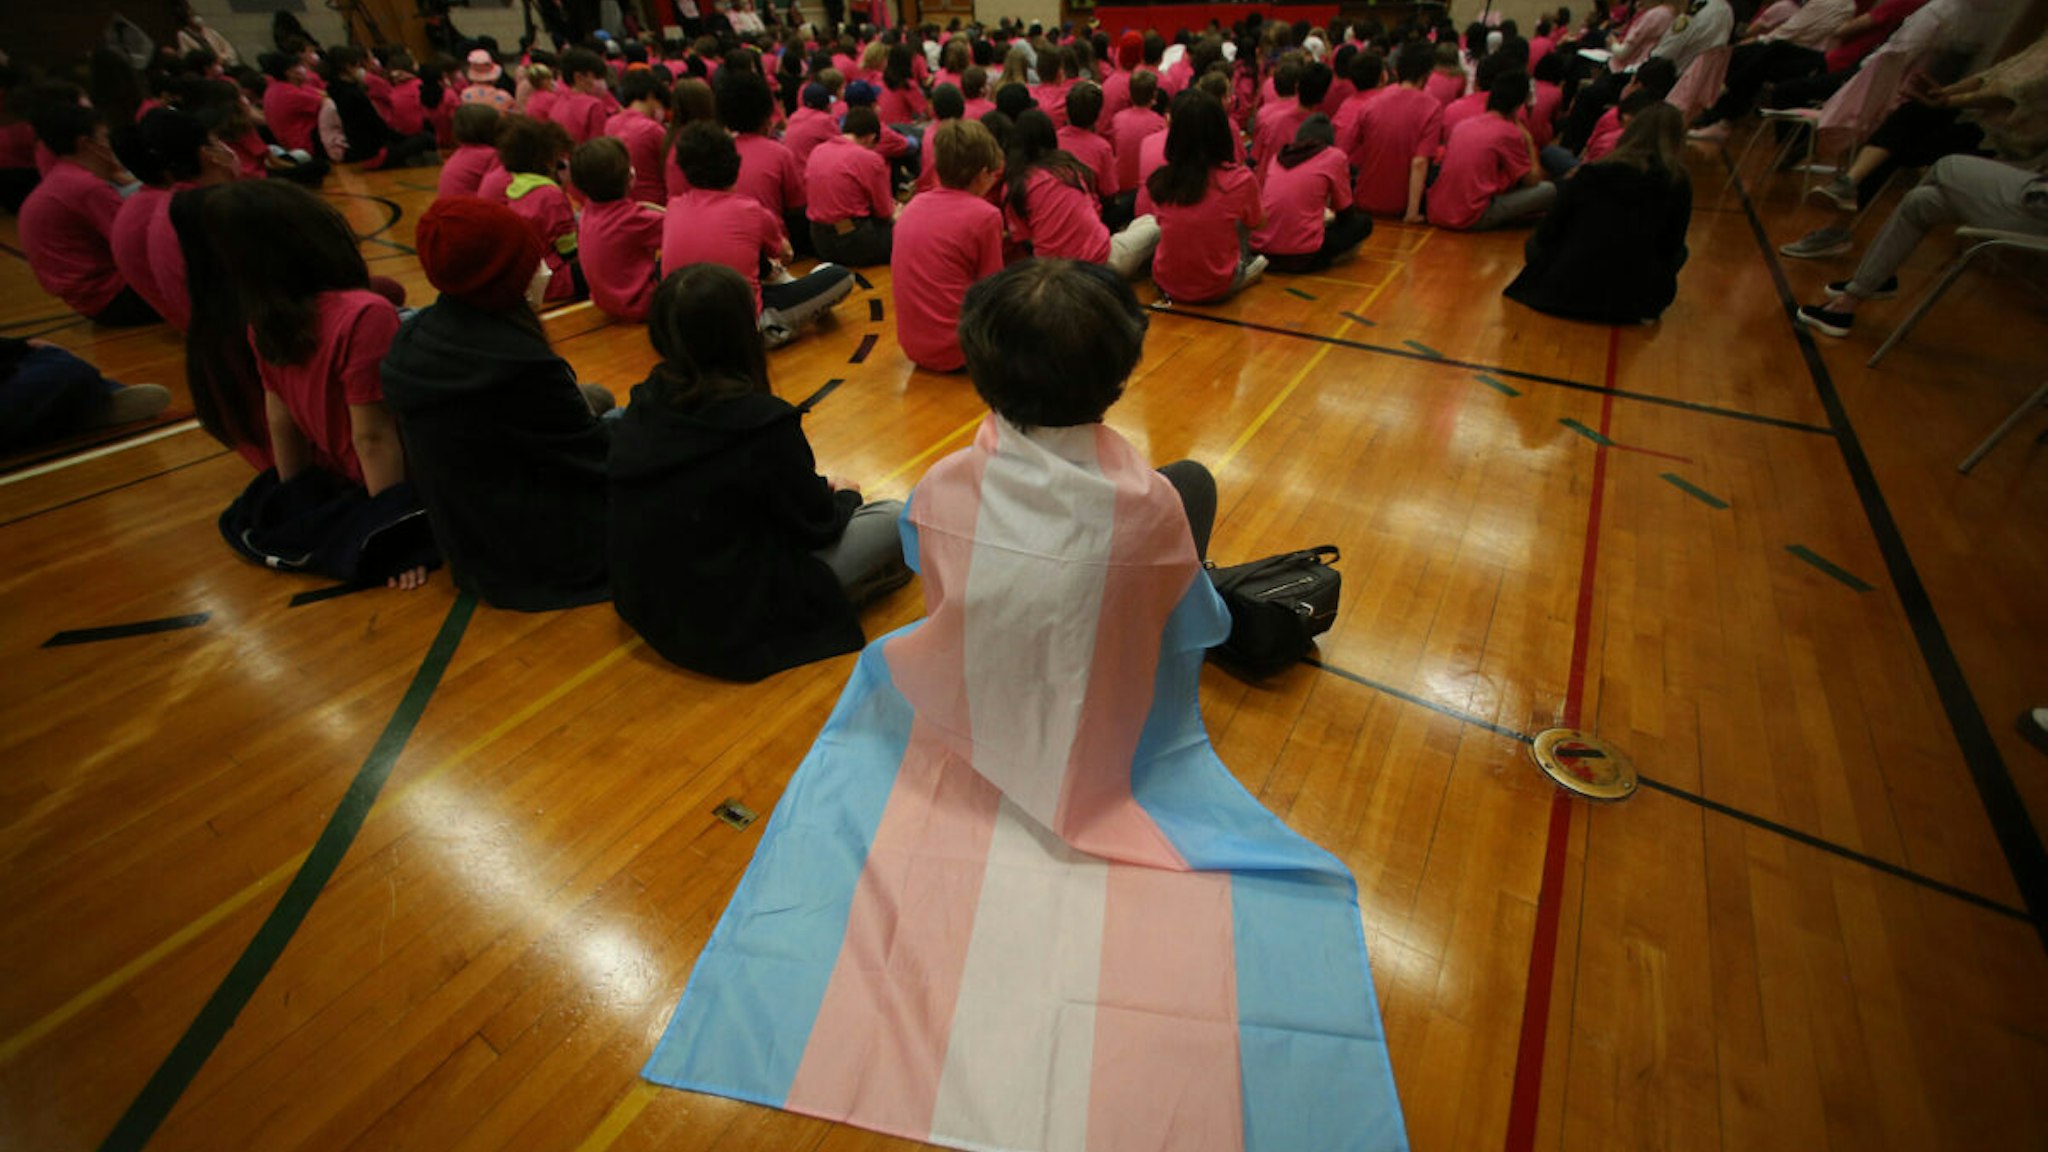 TORONTO, ON- APRIL 13 - A student wears a trans flag during an assembly at Bowmore Road Junior and Senior Public School celebrates International Day of Pink, aimed at building a more inclusive and diverse society by encouraging students to stand up against bullying towards their 2SLGBTQIA+ peers. The Toronto District School Board held its first in-person event since the start of the pandemic. in Toronto. April 13, 2022.